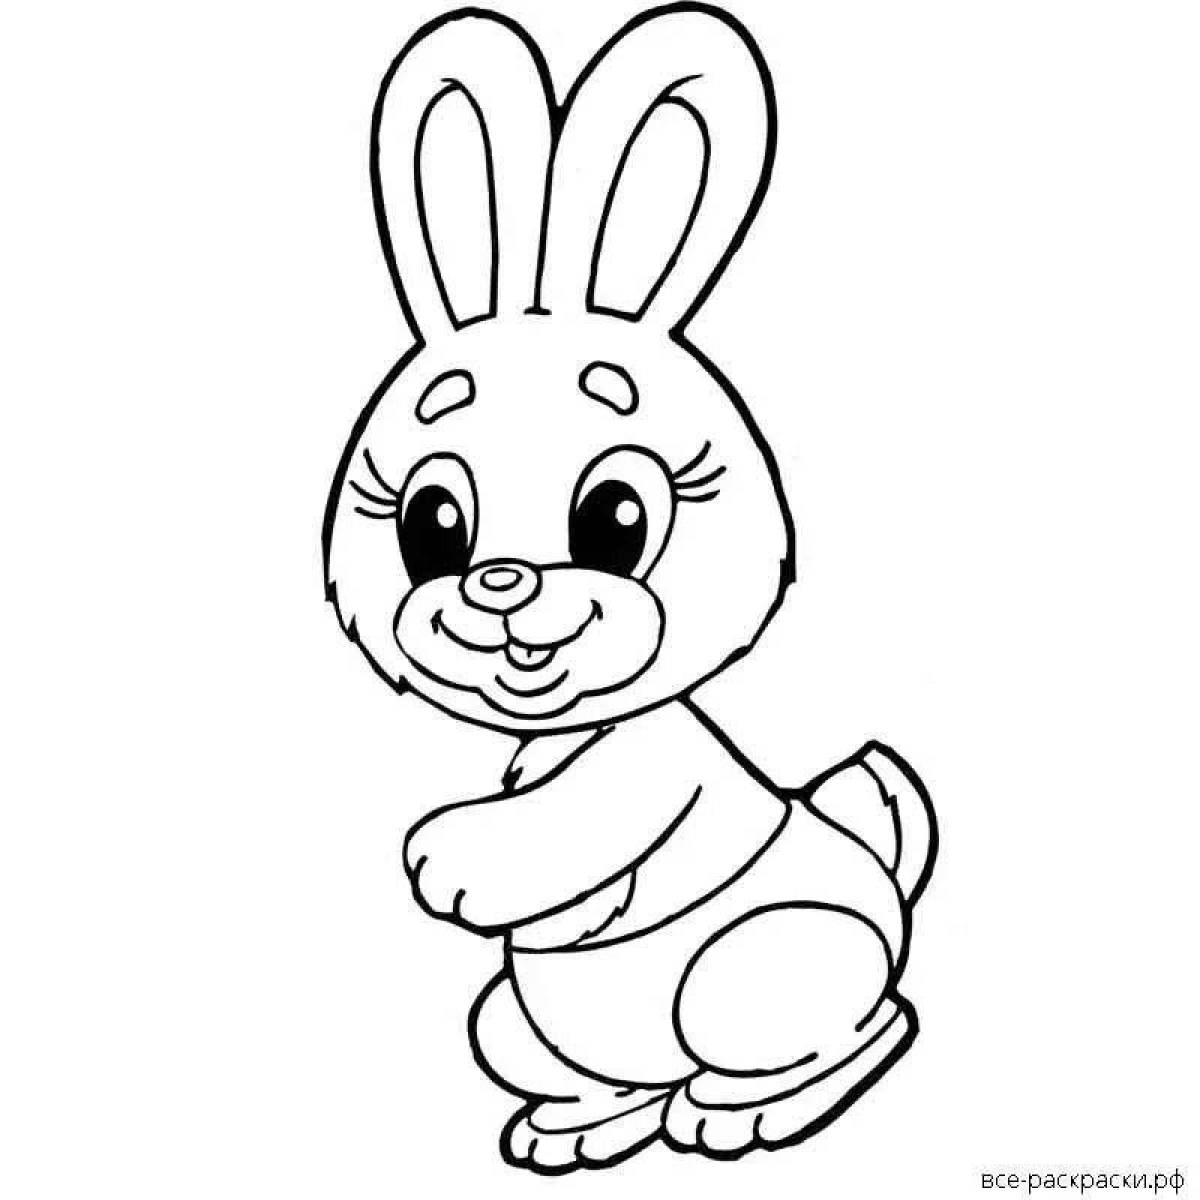 Stylish Bunny Coloring Page for 6-7 year olds